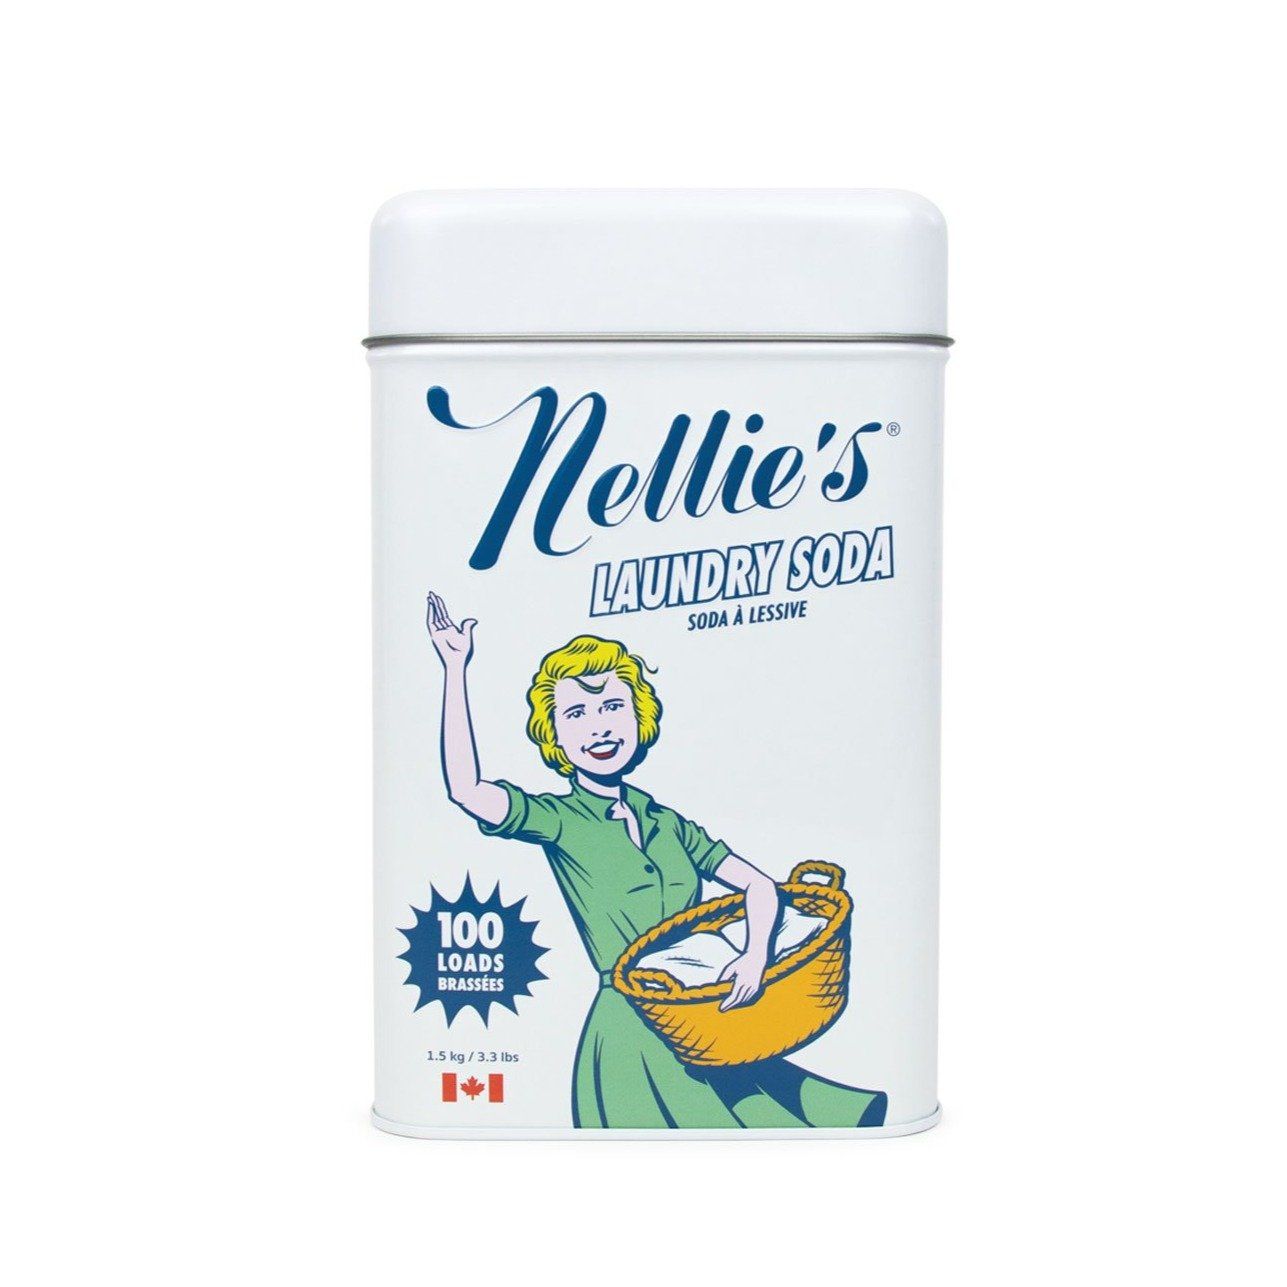 Laundry Soda Powder by Nellie's Cleaning Nellie's 1.5kg (100 loads) metal tin Prettycleanshop